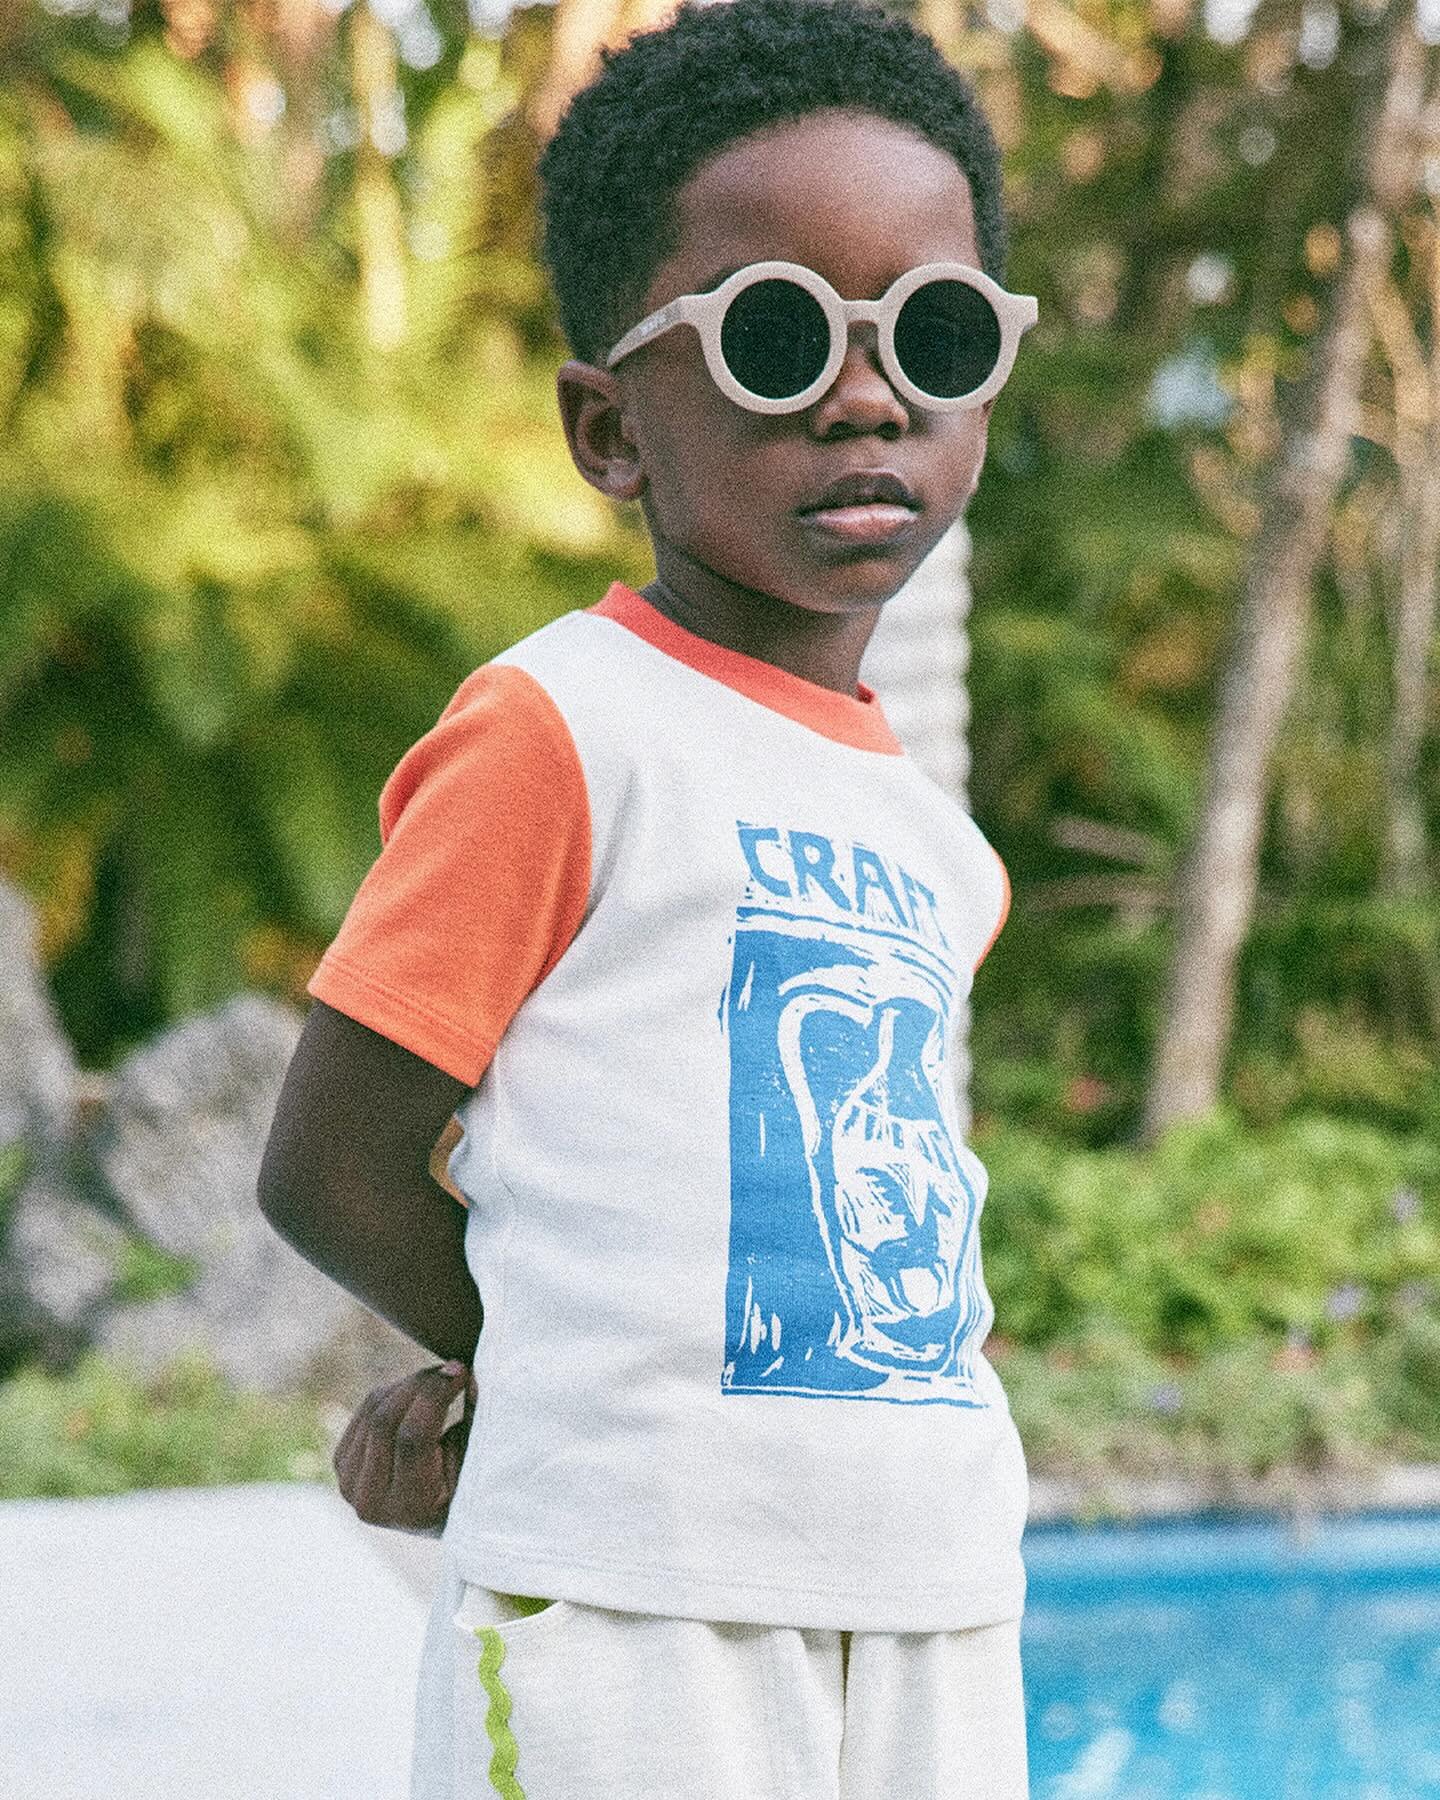 The Boy Edit &mdash; Some of our favorite Summer Lookbook outfits for those seeking boys&rsquo; styling inspo.